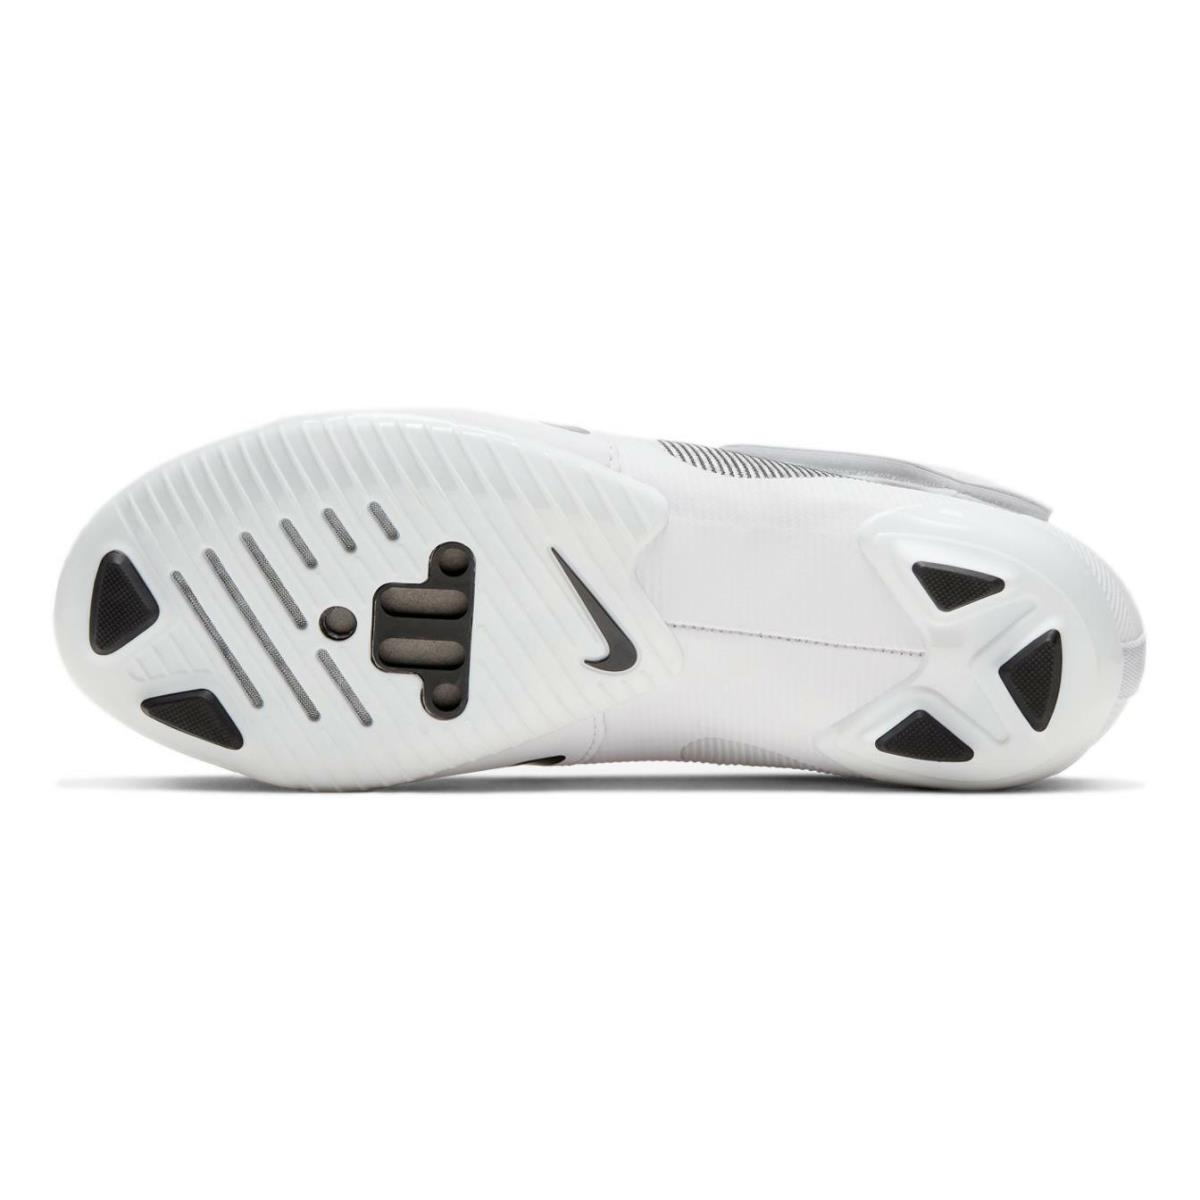 Nike shoes SuperRep Cycle - White 1